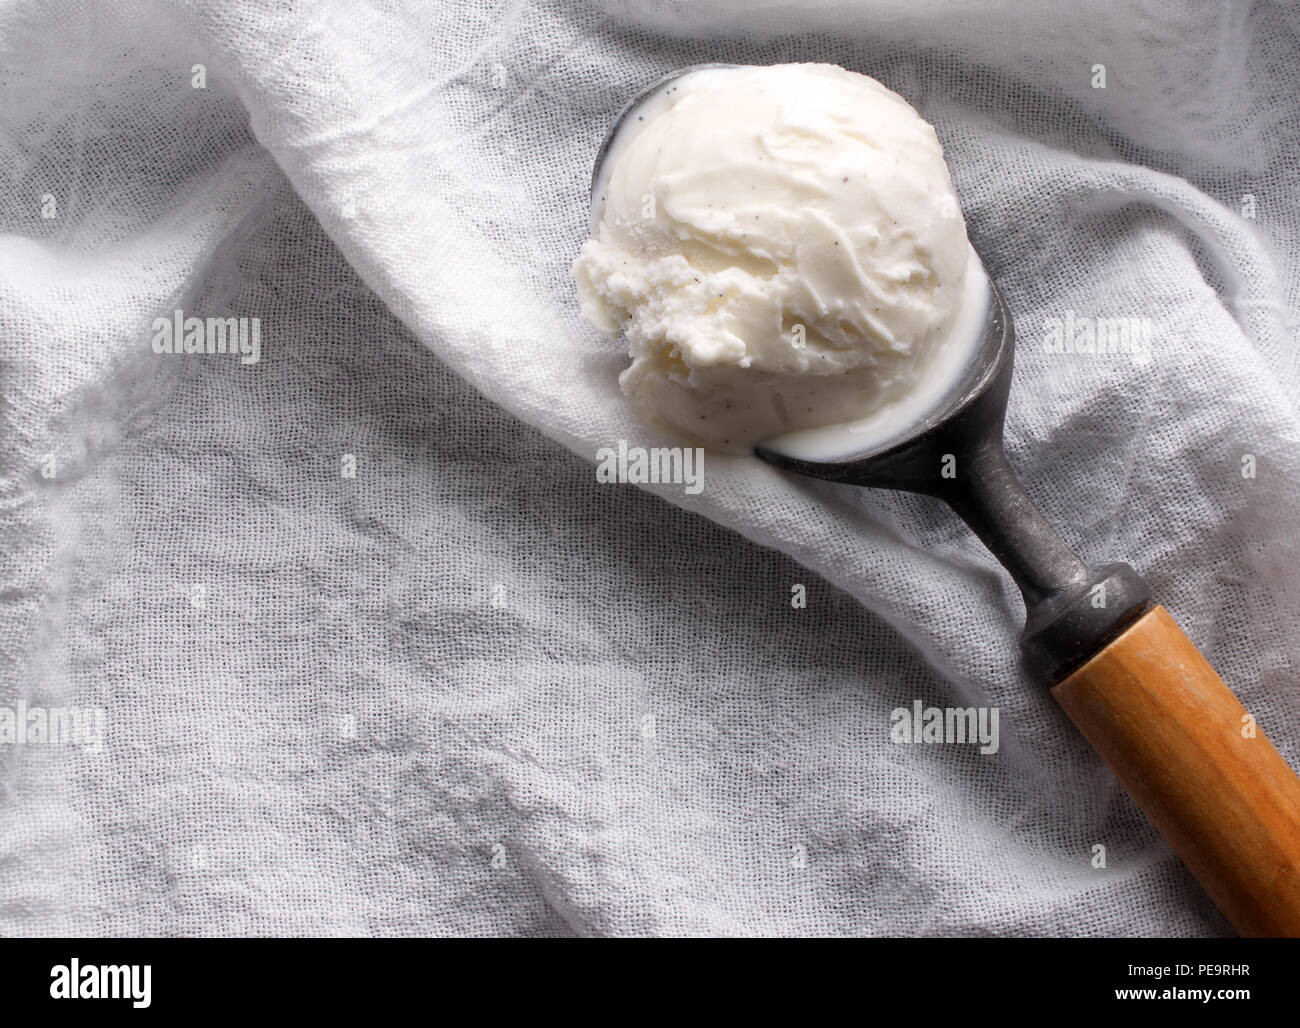 https://c8.alamy.com/comp/PE9RHR/close-up-photograph-of-melting-vanilla-ice-cream-in-a-vintage-ice-cream-scoop-with-a-wooden-handle-the-scoop-is-sitting-on-a-white-woven-cotton-cloth-PE9RHR.jpg